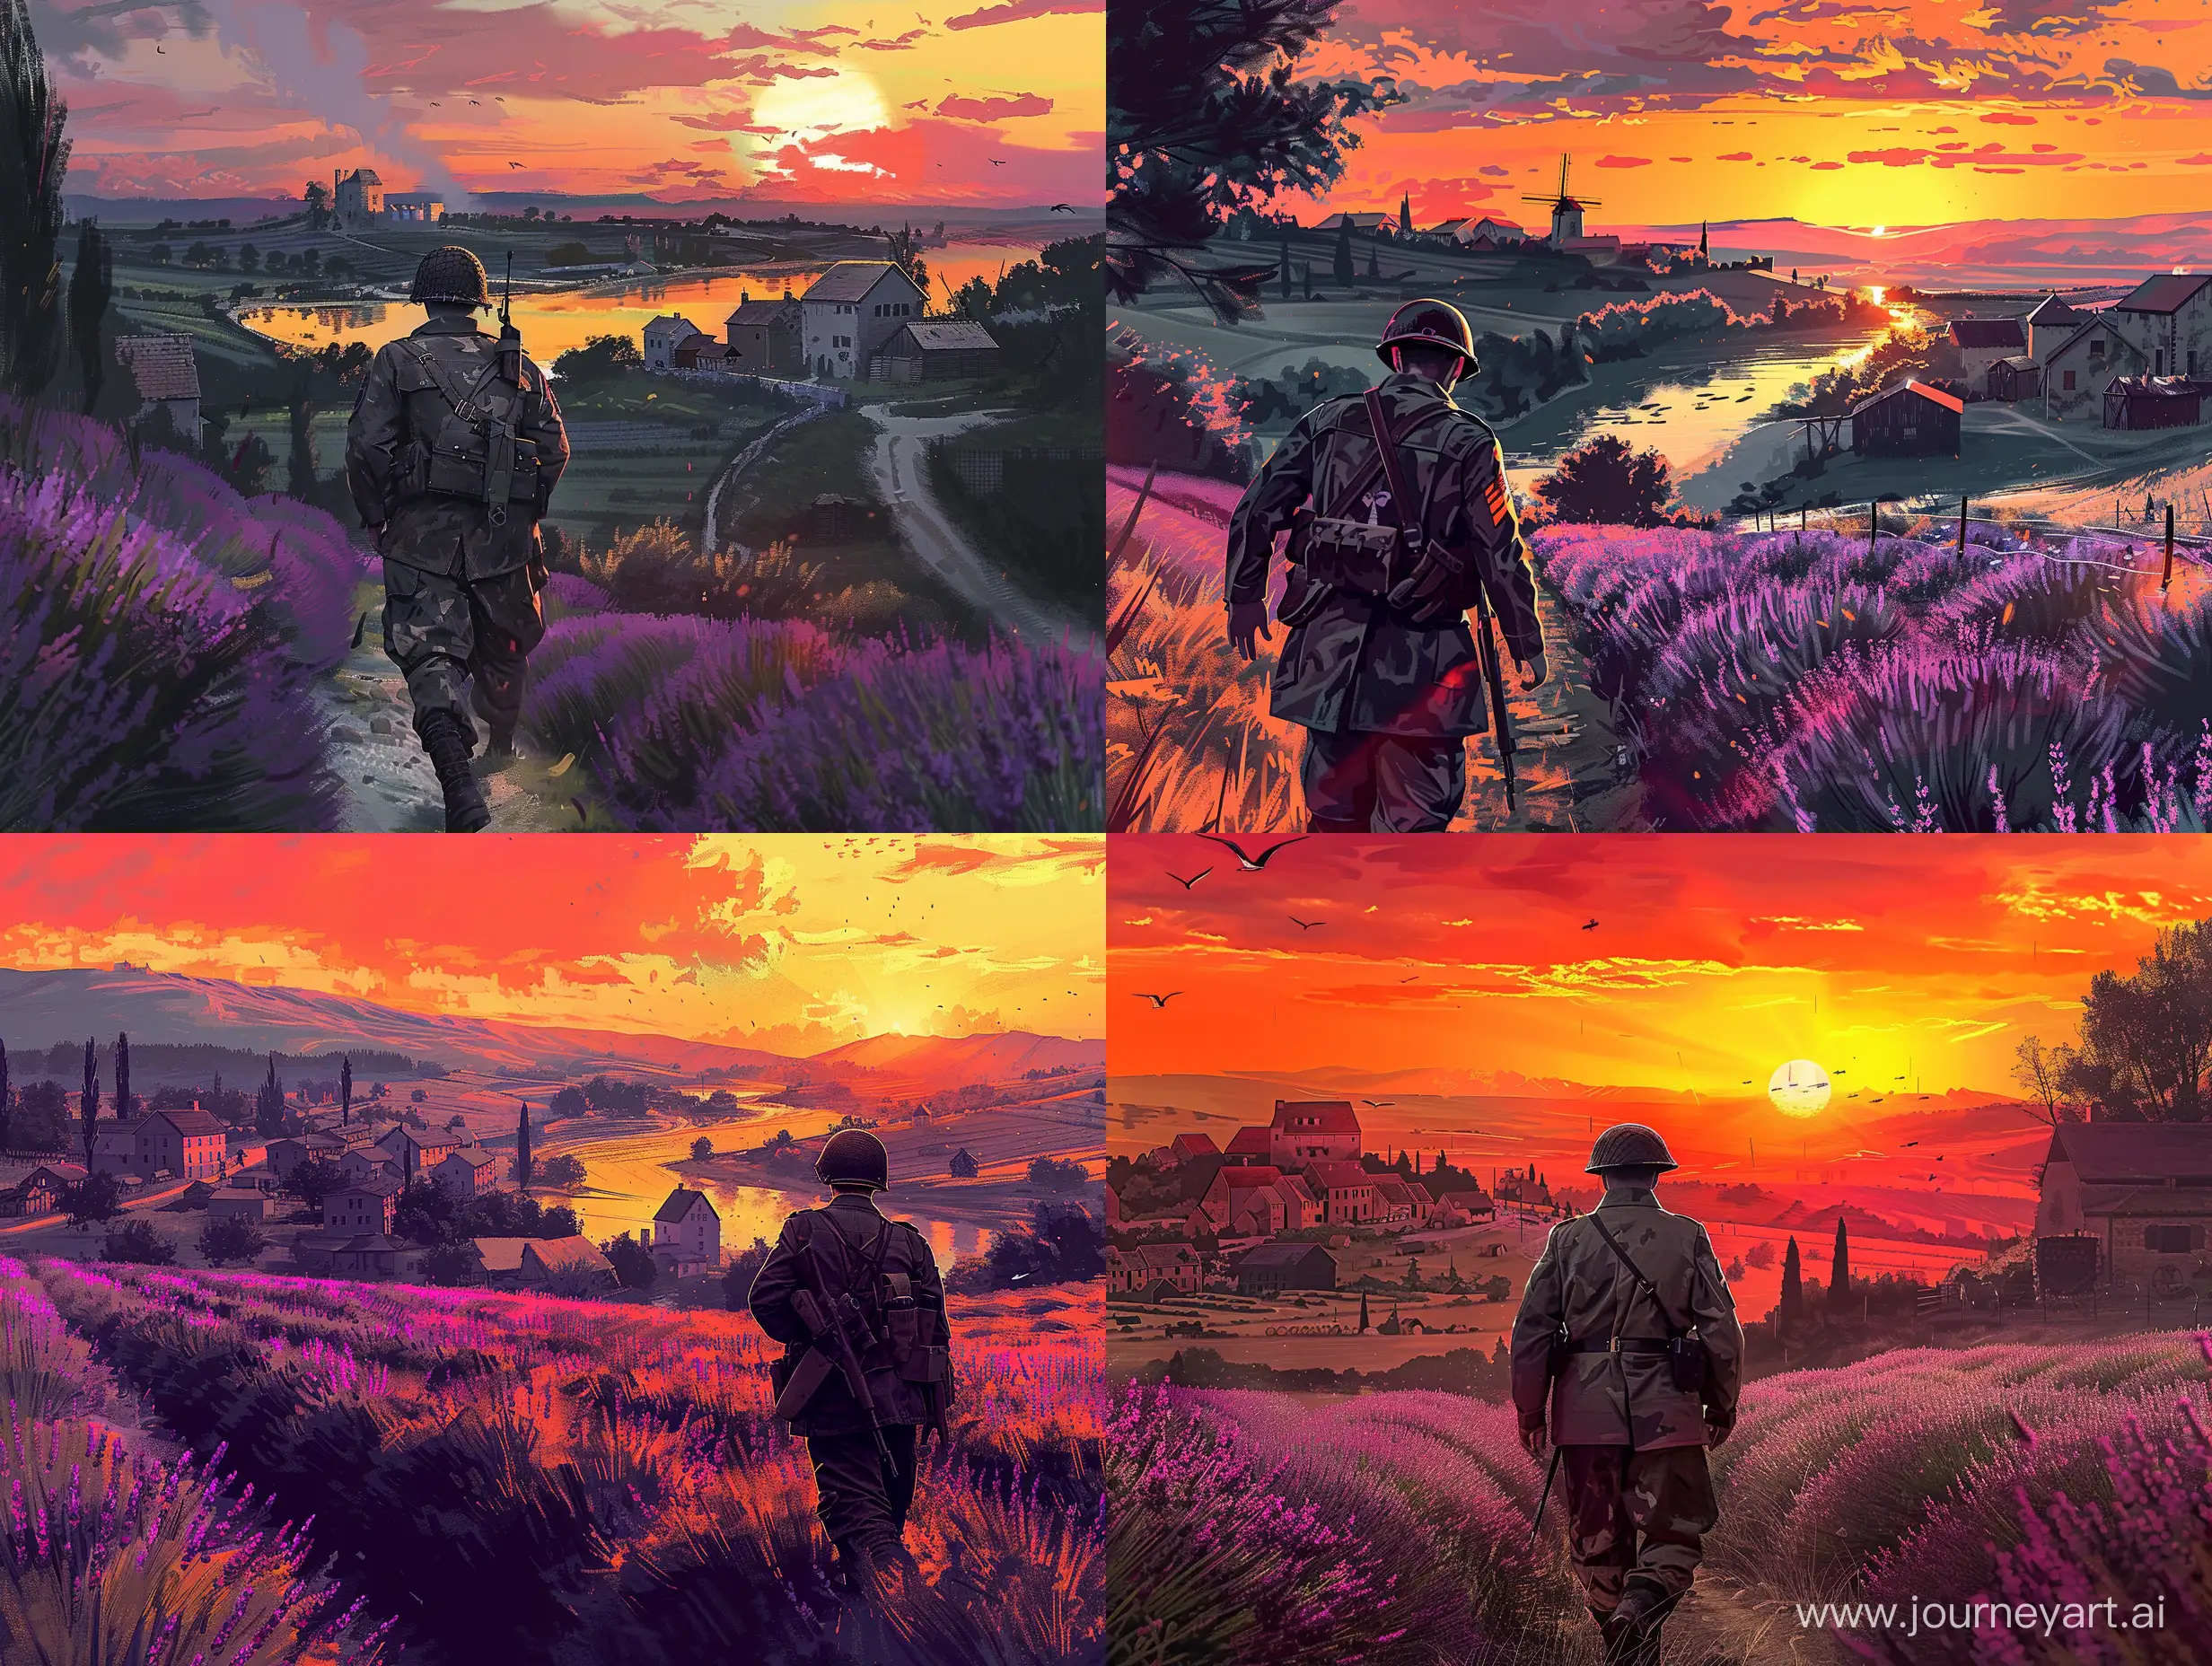 WWII-Soldier-Strolling-Through-Lavender-Fields-in-Provence-Digital-Sketch